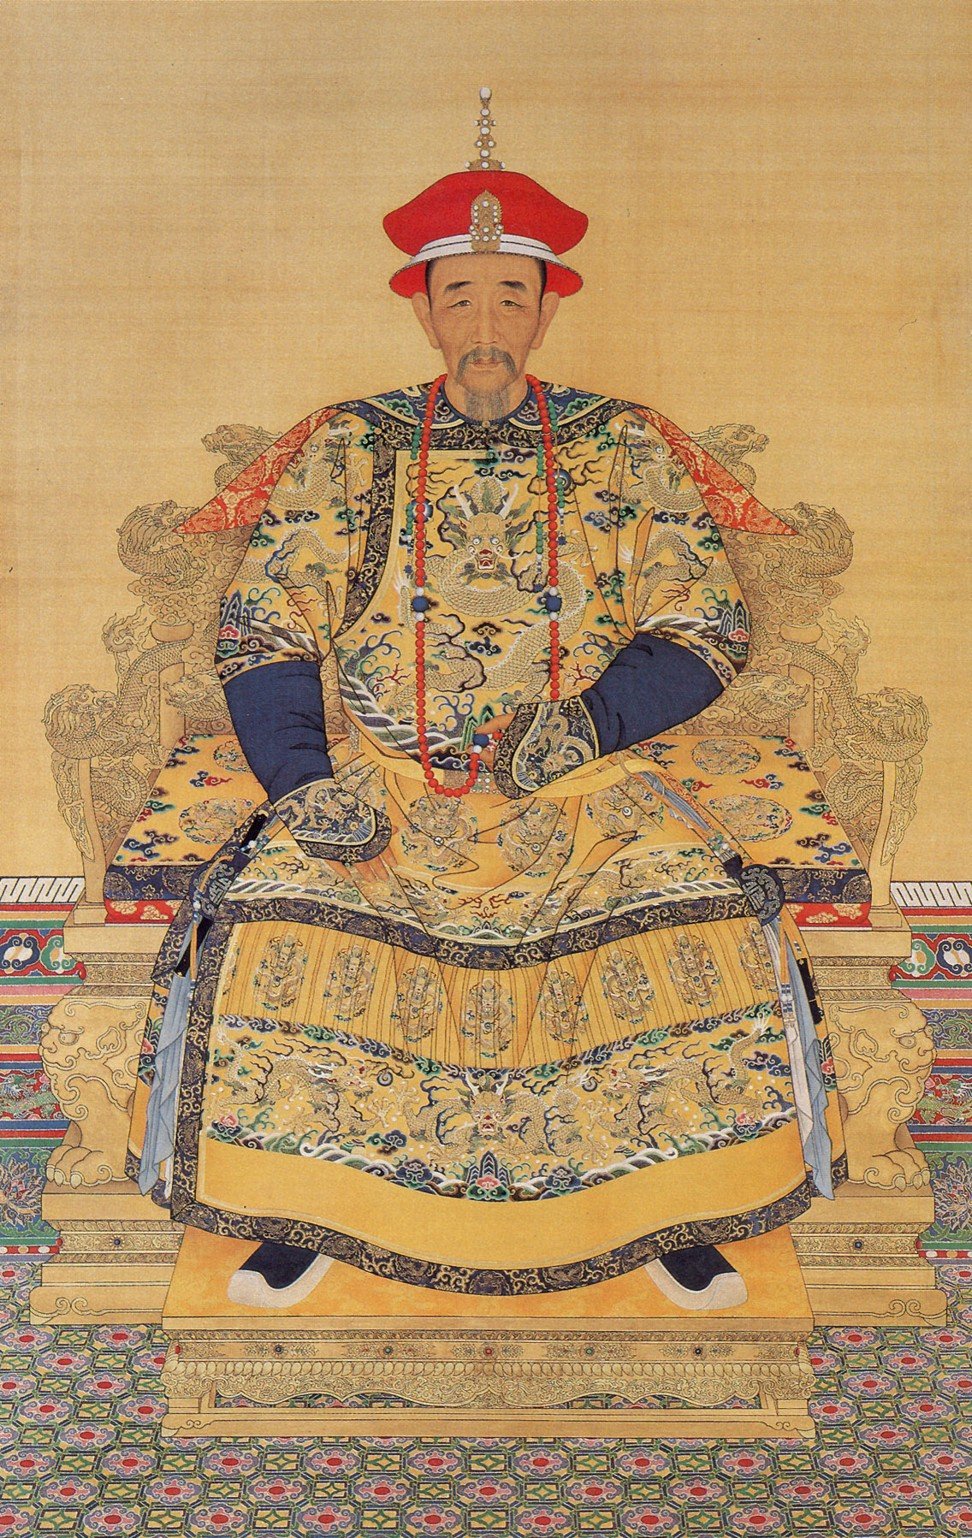 A painting of the Kangxi emperor, who welcomed foreign merchants.